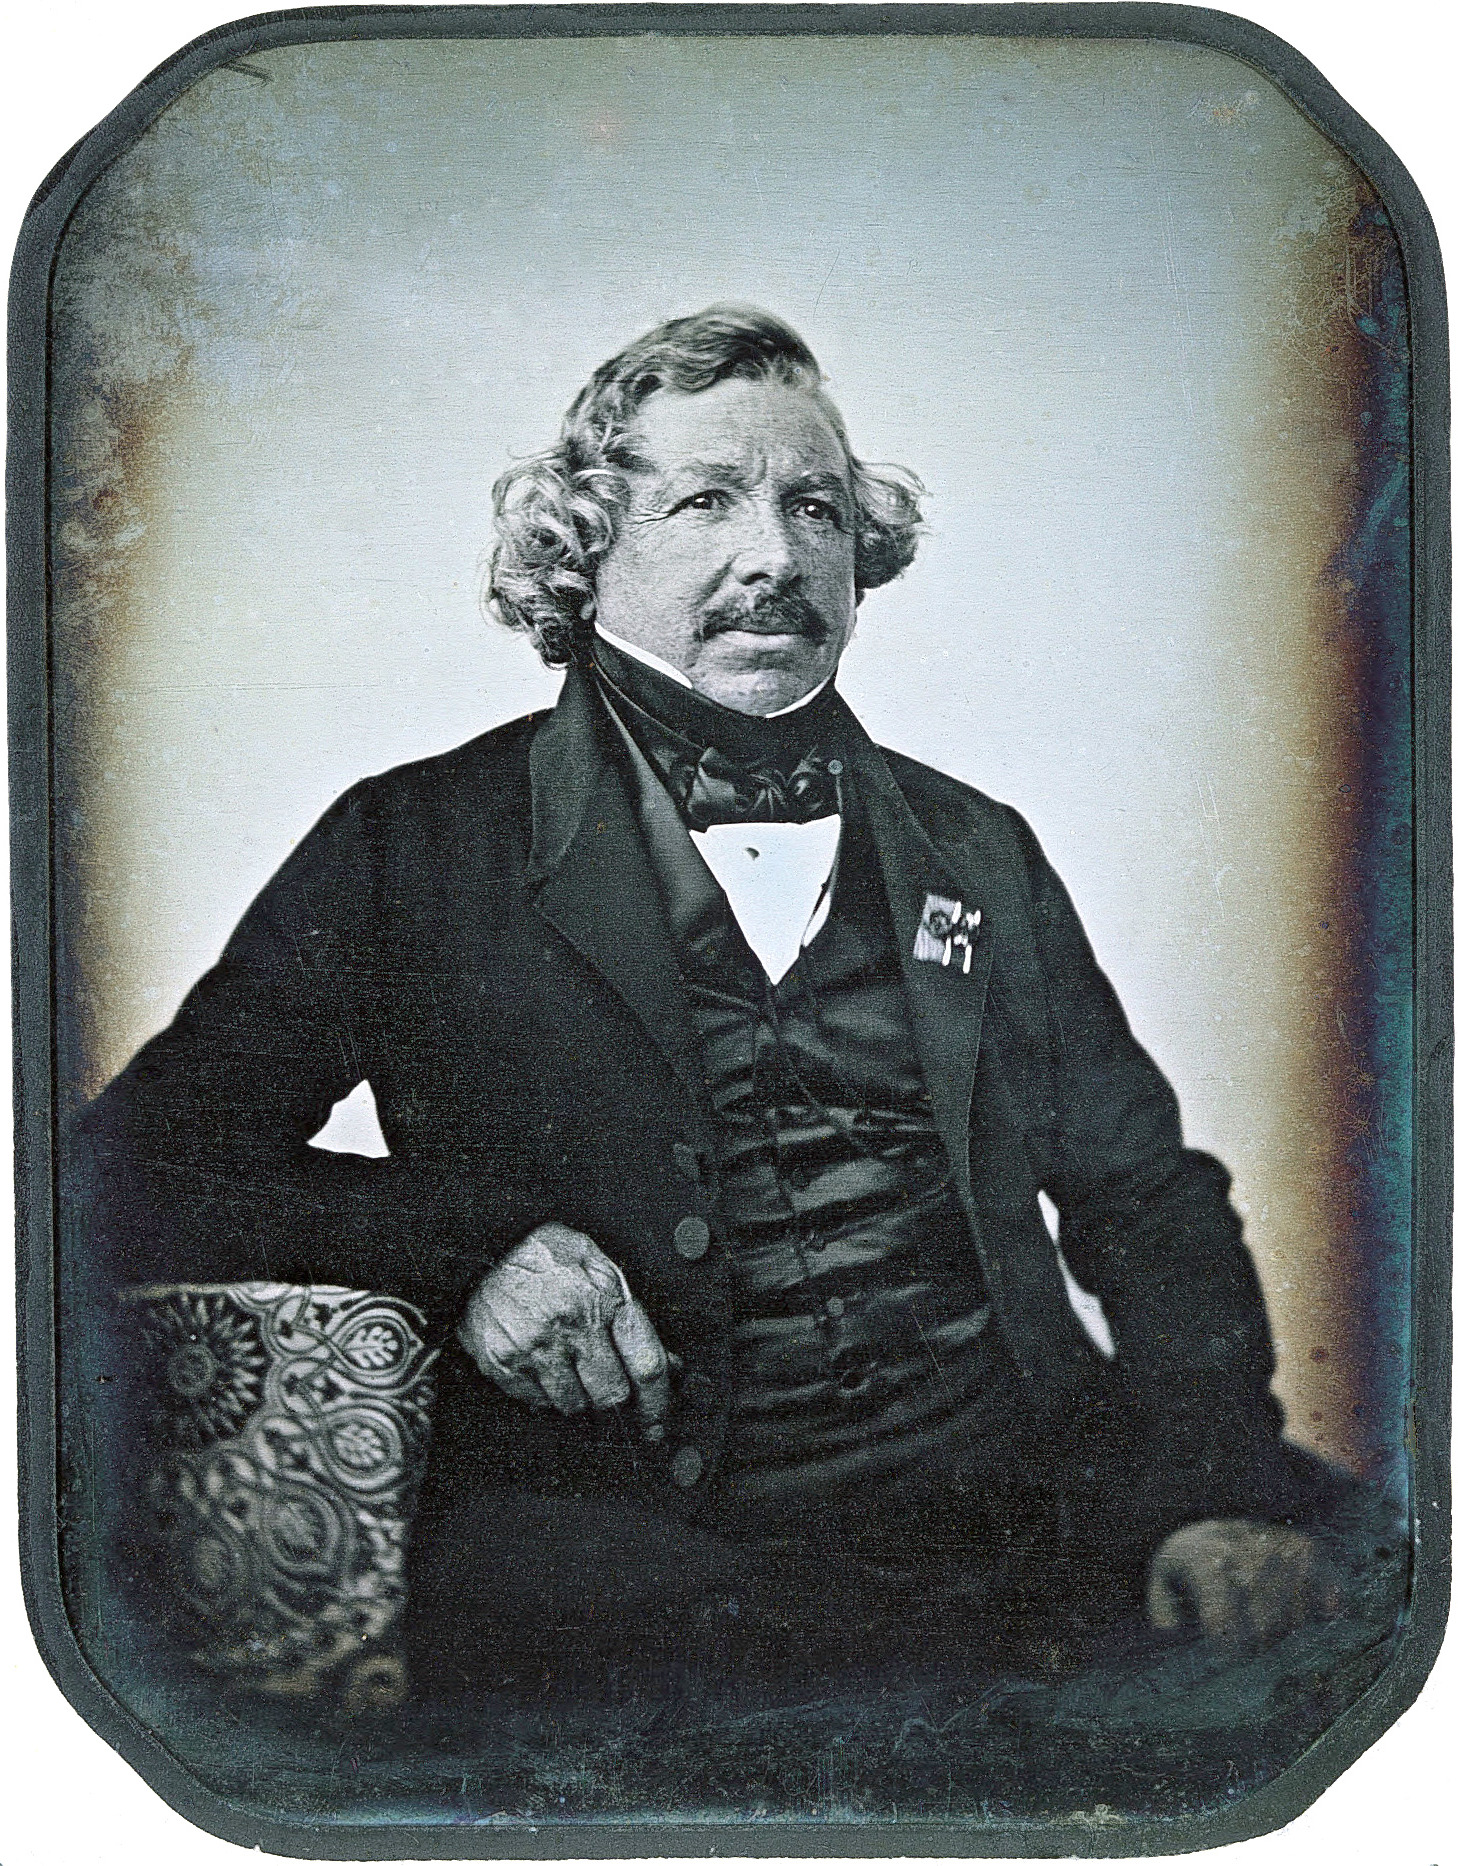 LOUIS DAGUERRE: He Did It With Mirrors